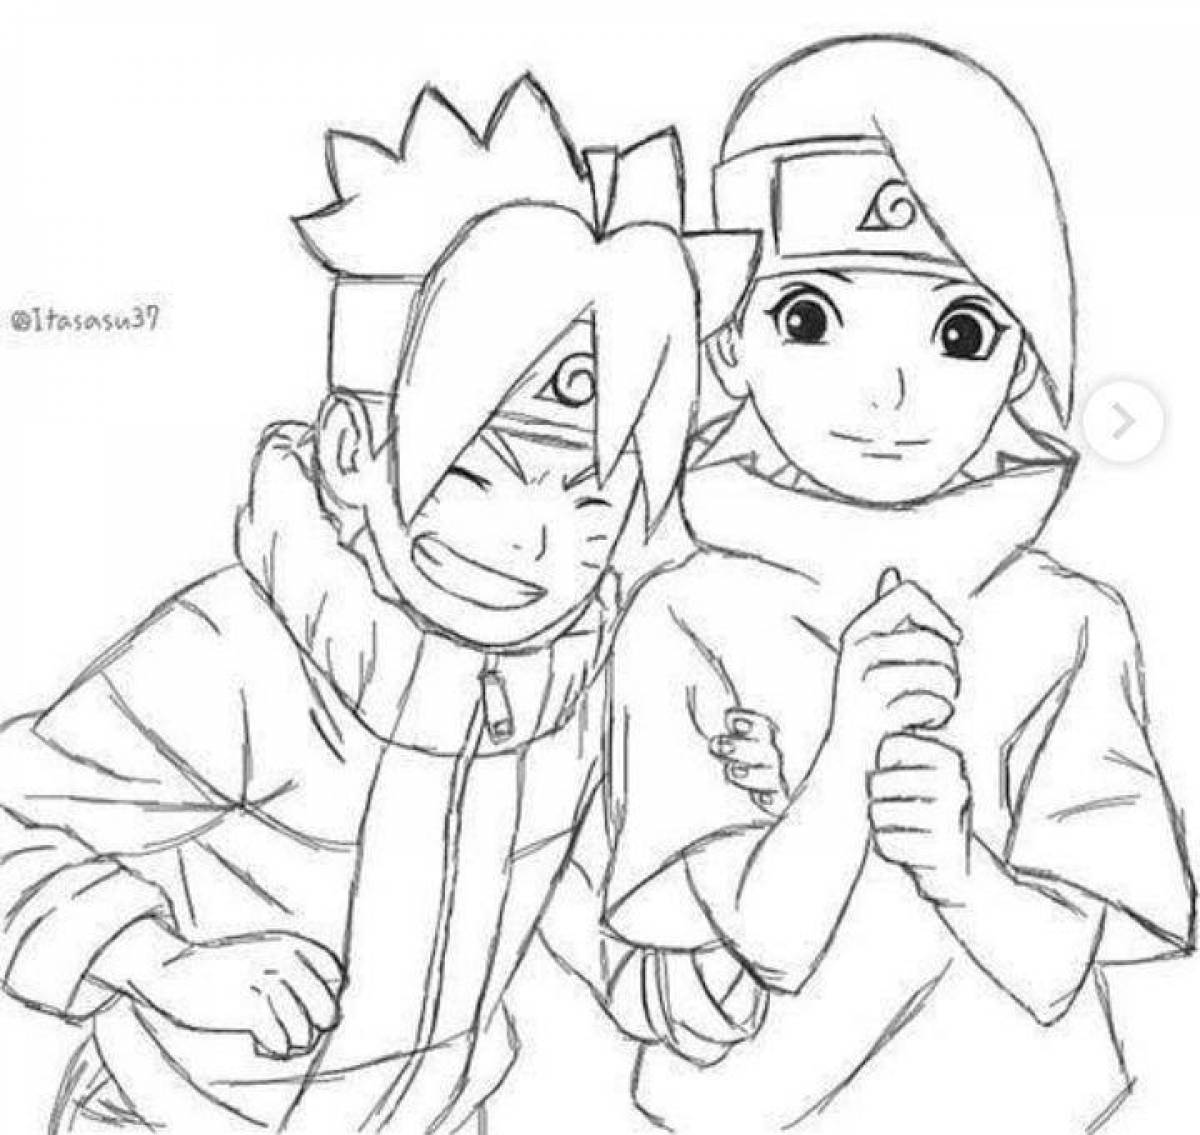 Naruto and Boruto's wonderful coloring pages